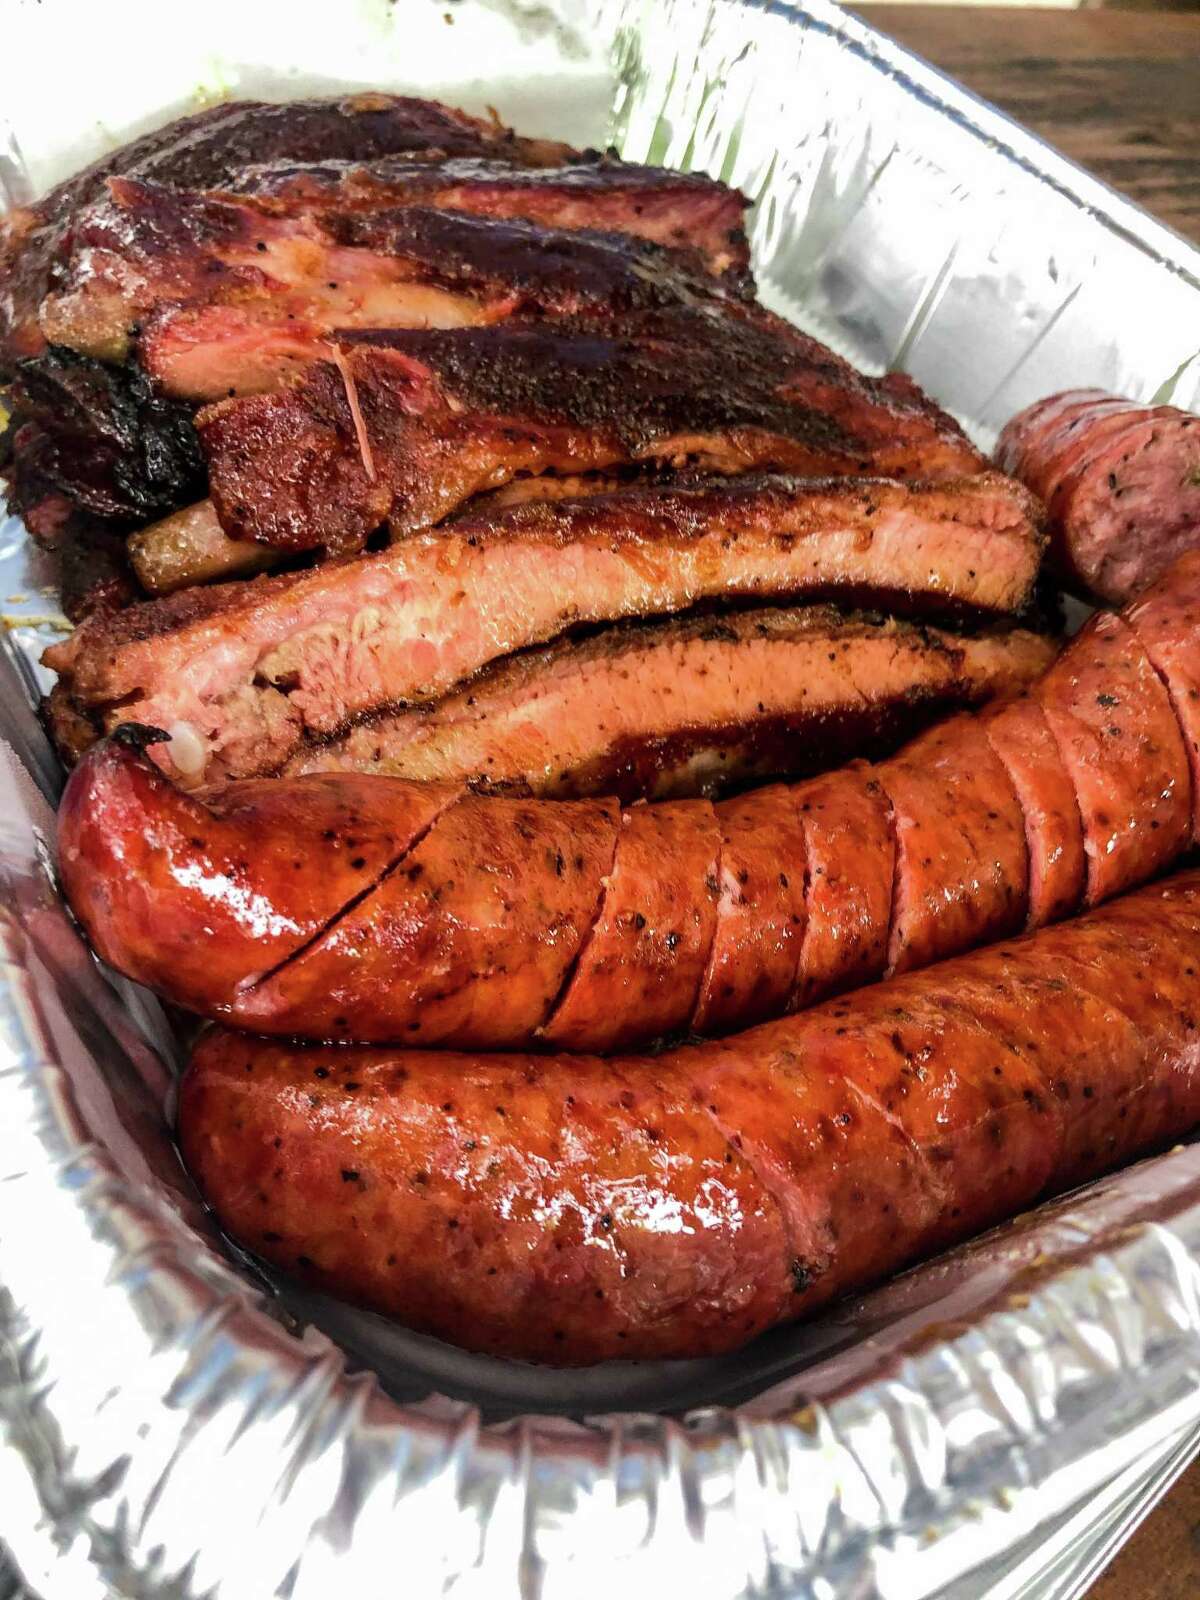 Sausage and ribs from Pinkerton’s Barbecue